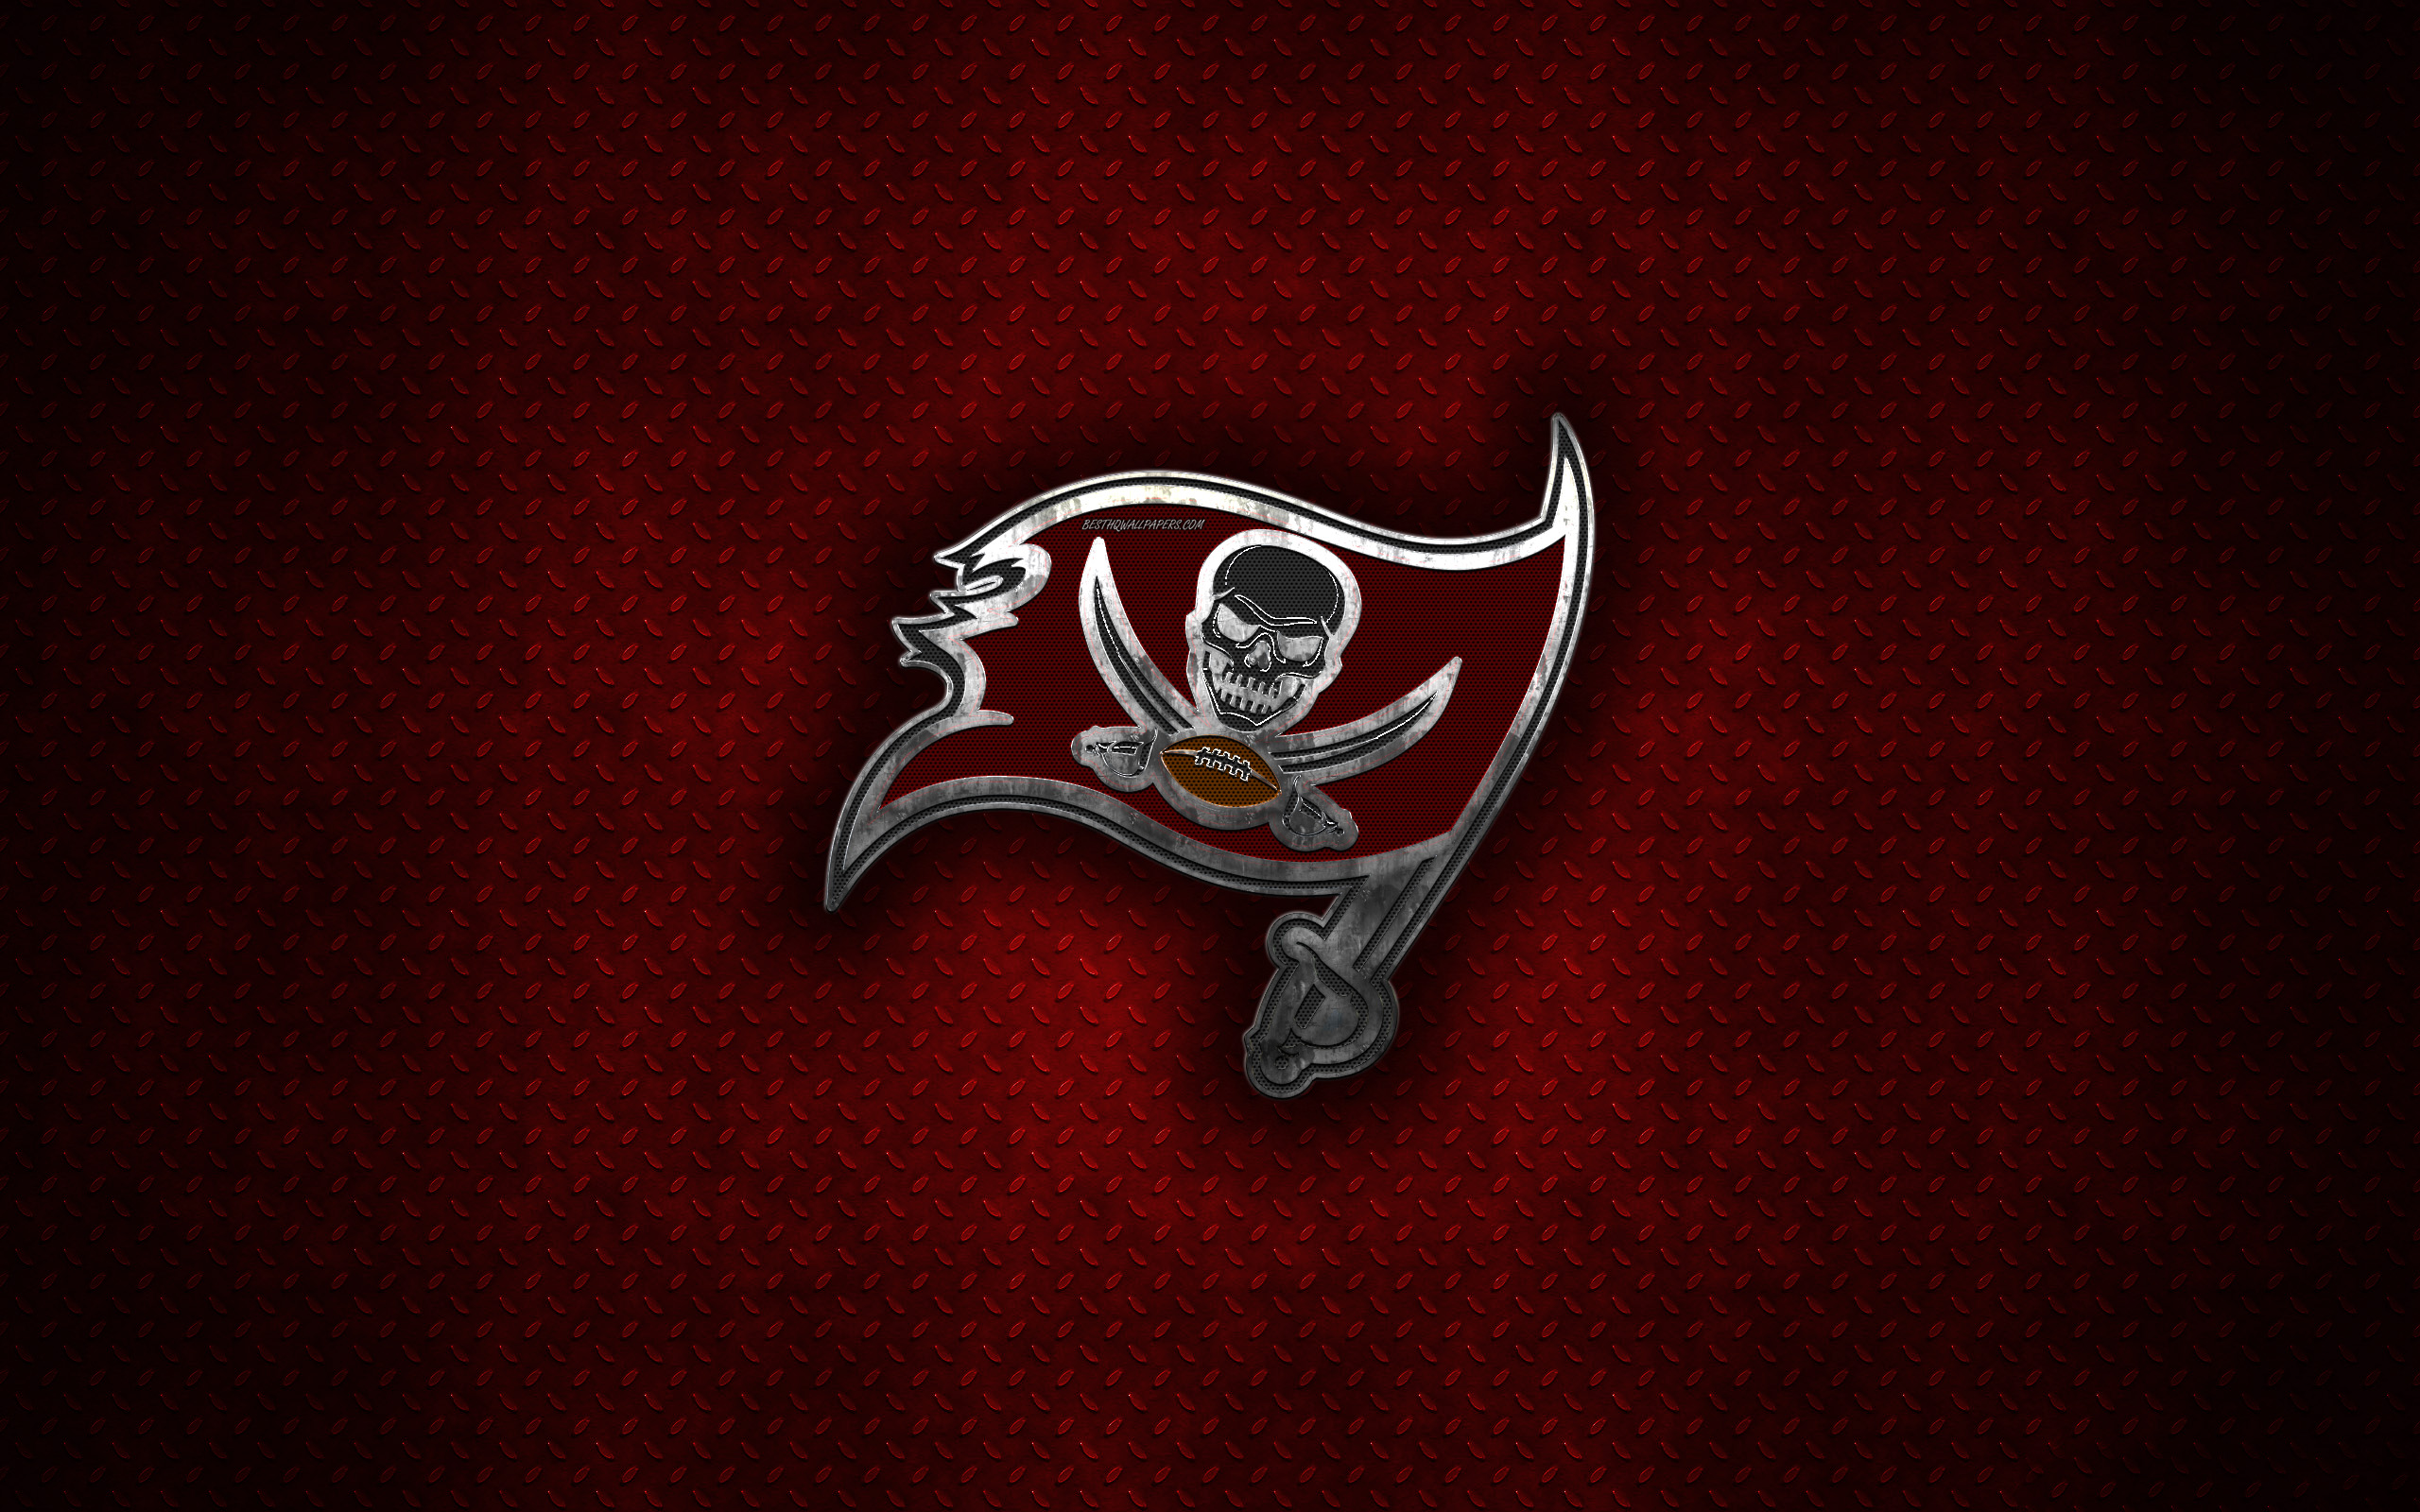 Tampa Bay Buccaneers Wallpapers Hdtampa Bay Buccaneers Wallpapers Tampa Bay  Buccaneers Background Ydsvcrbe Wallpaper  照片图像